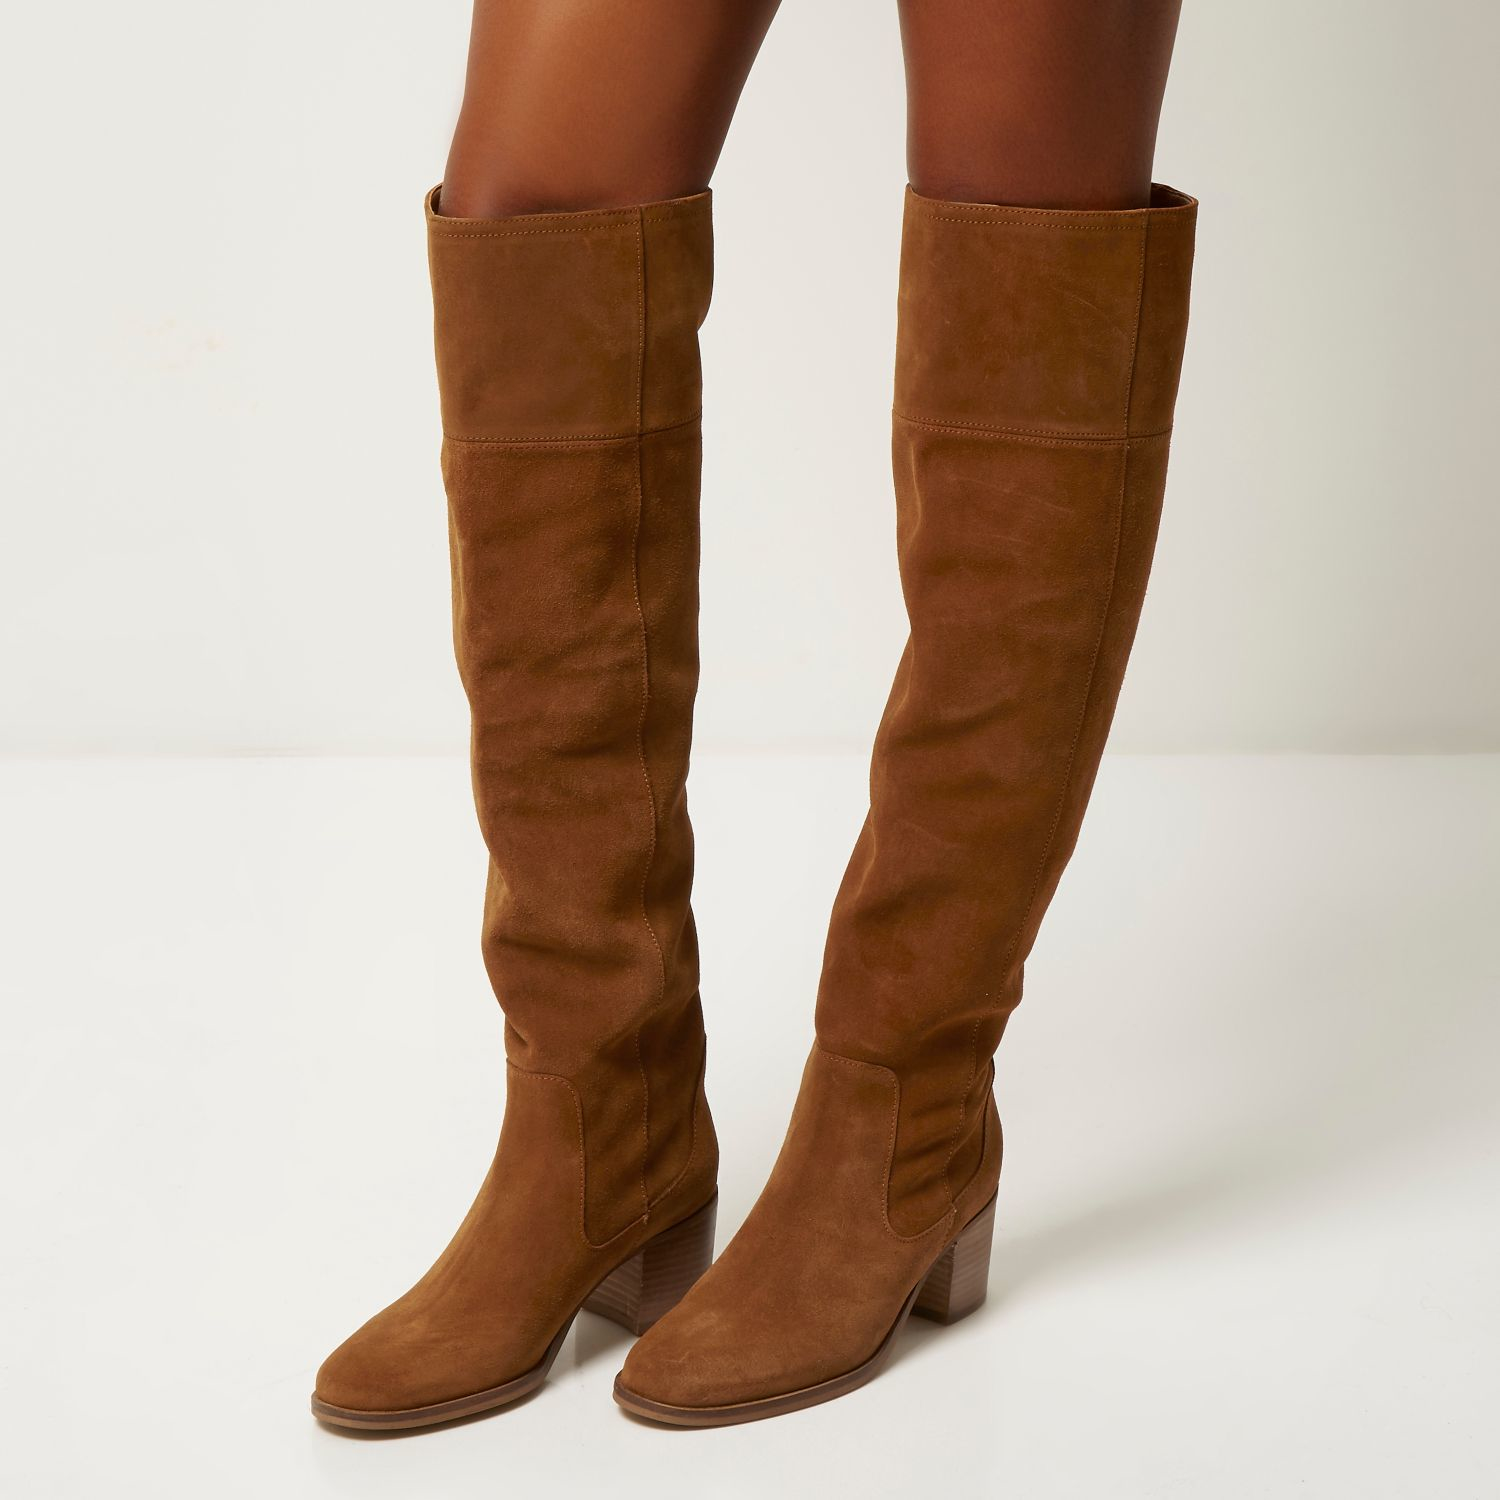 River Island Tan Brown Suede Knee High Boots Lyst